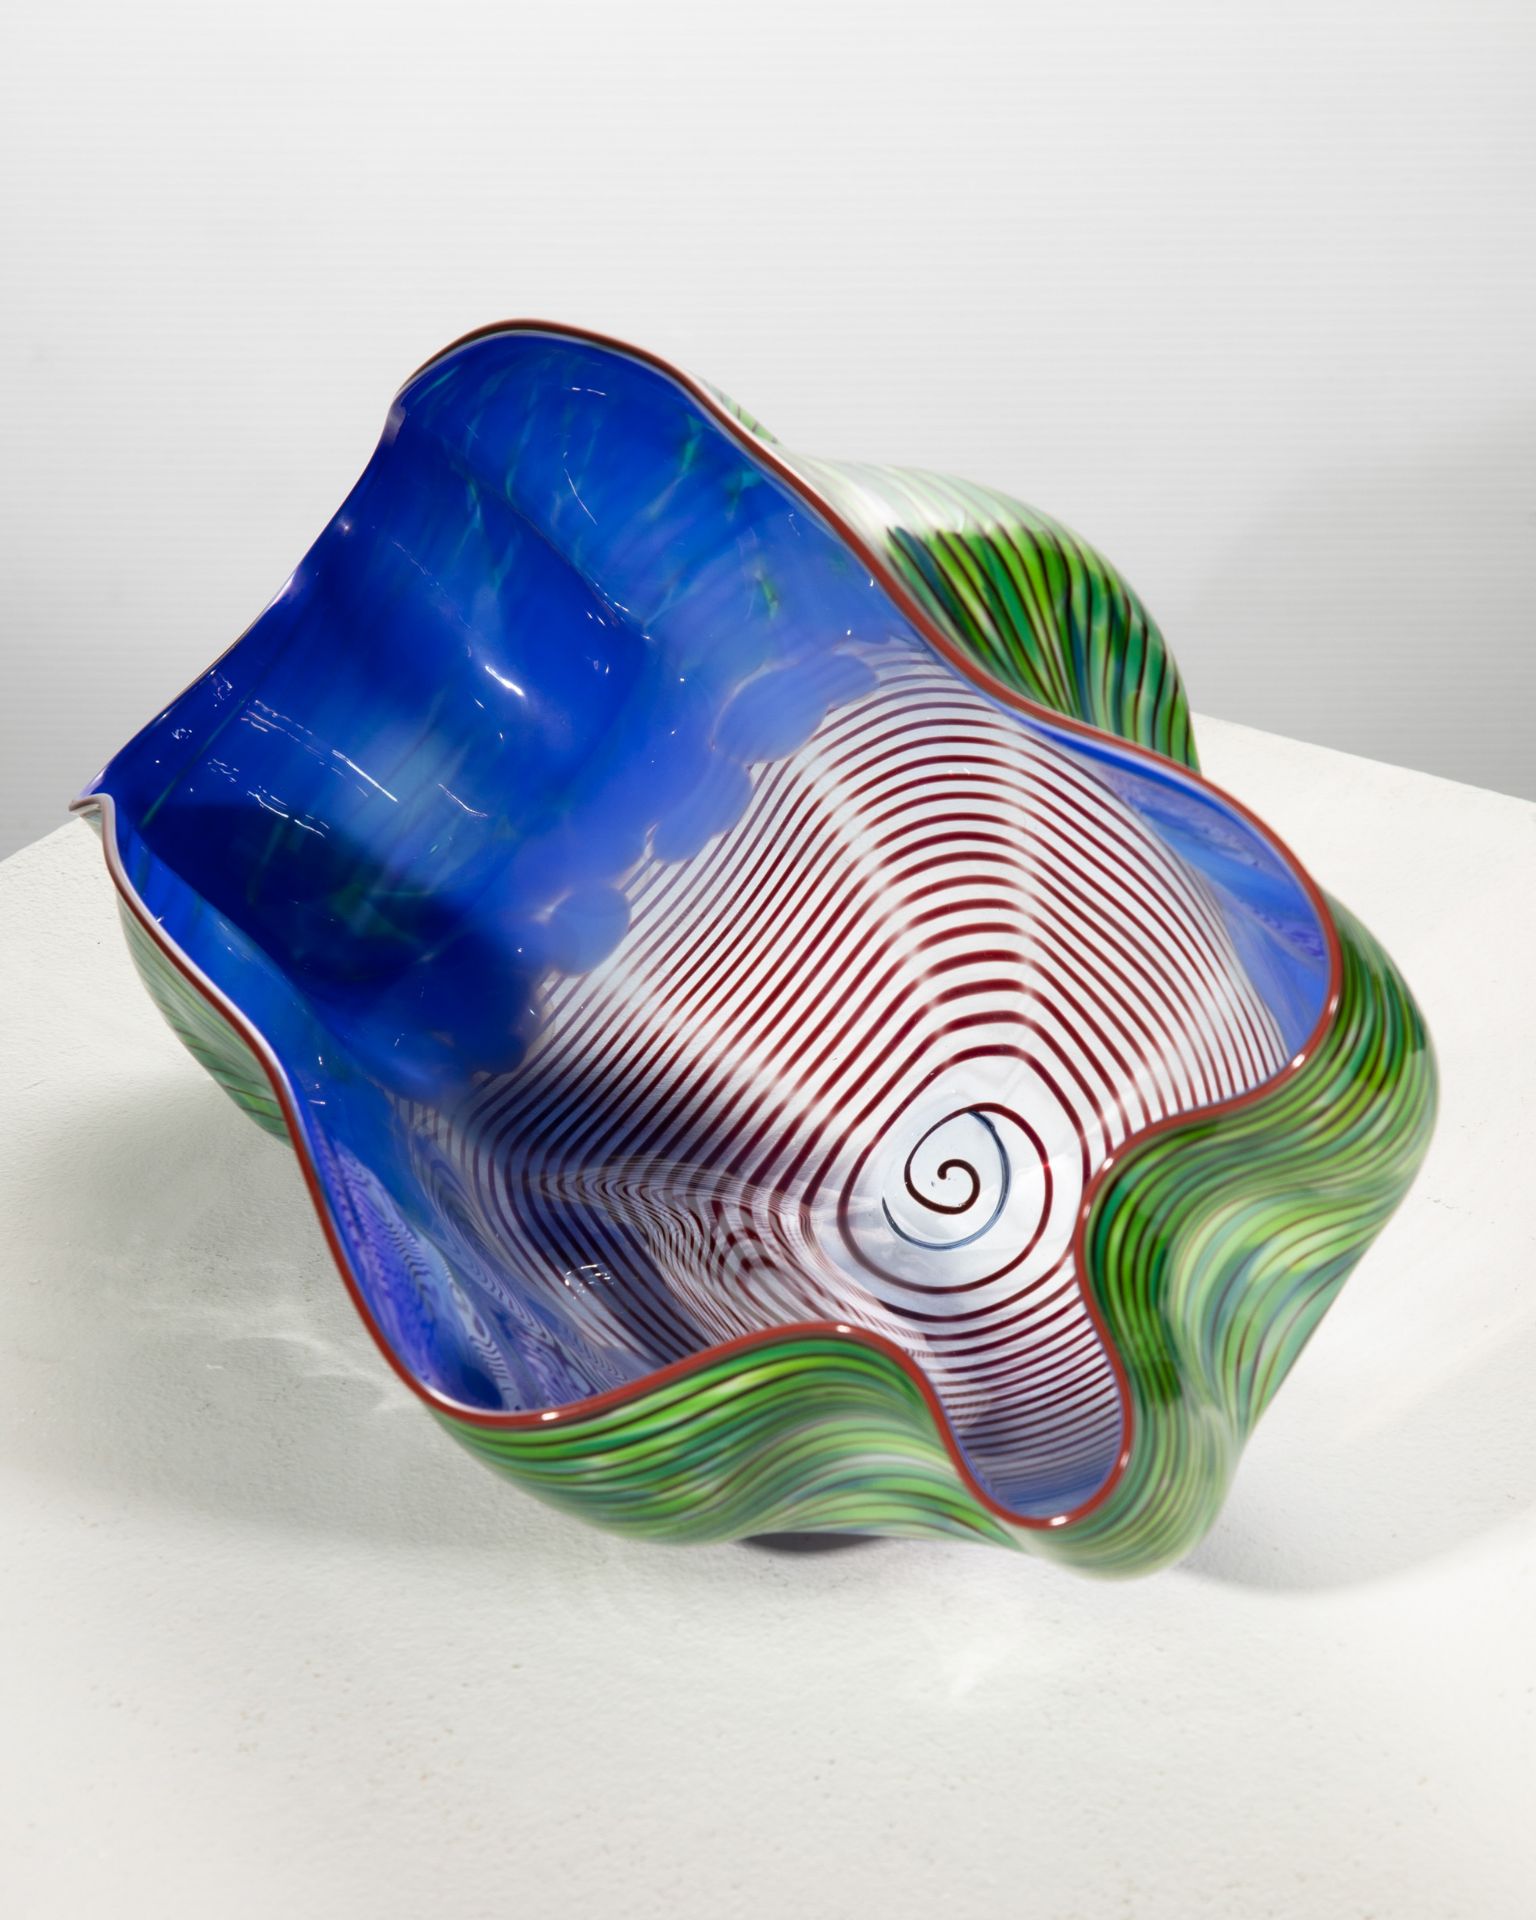 Dale Chihuly, 3 seaforms piece sculptural glasforms - Image 5 of 17